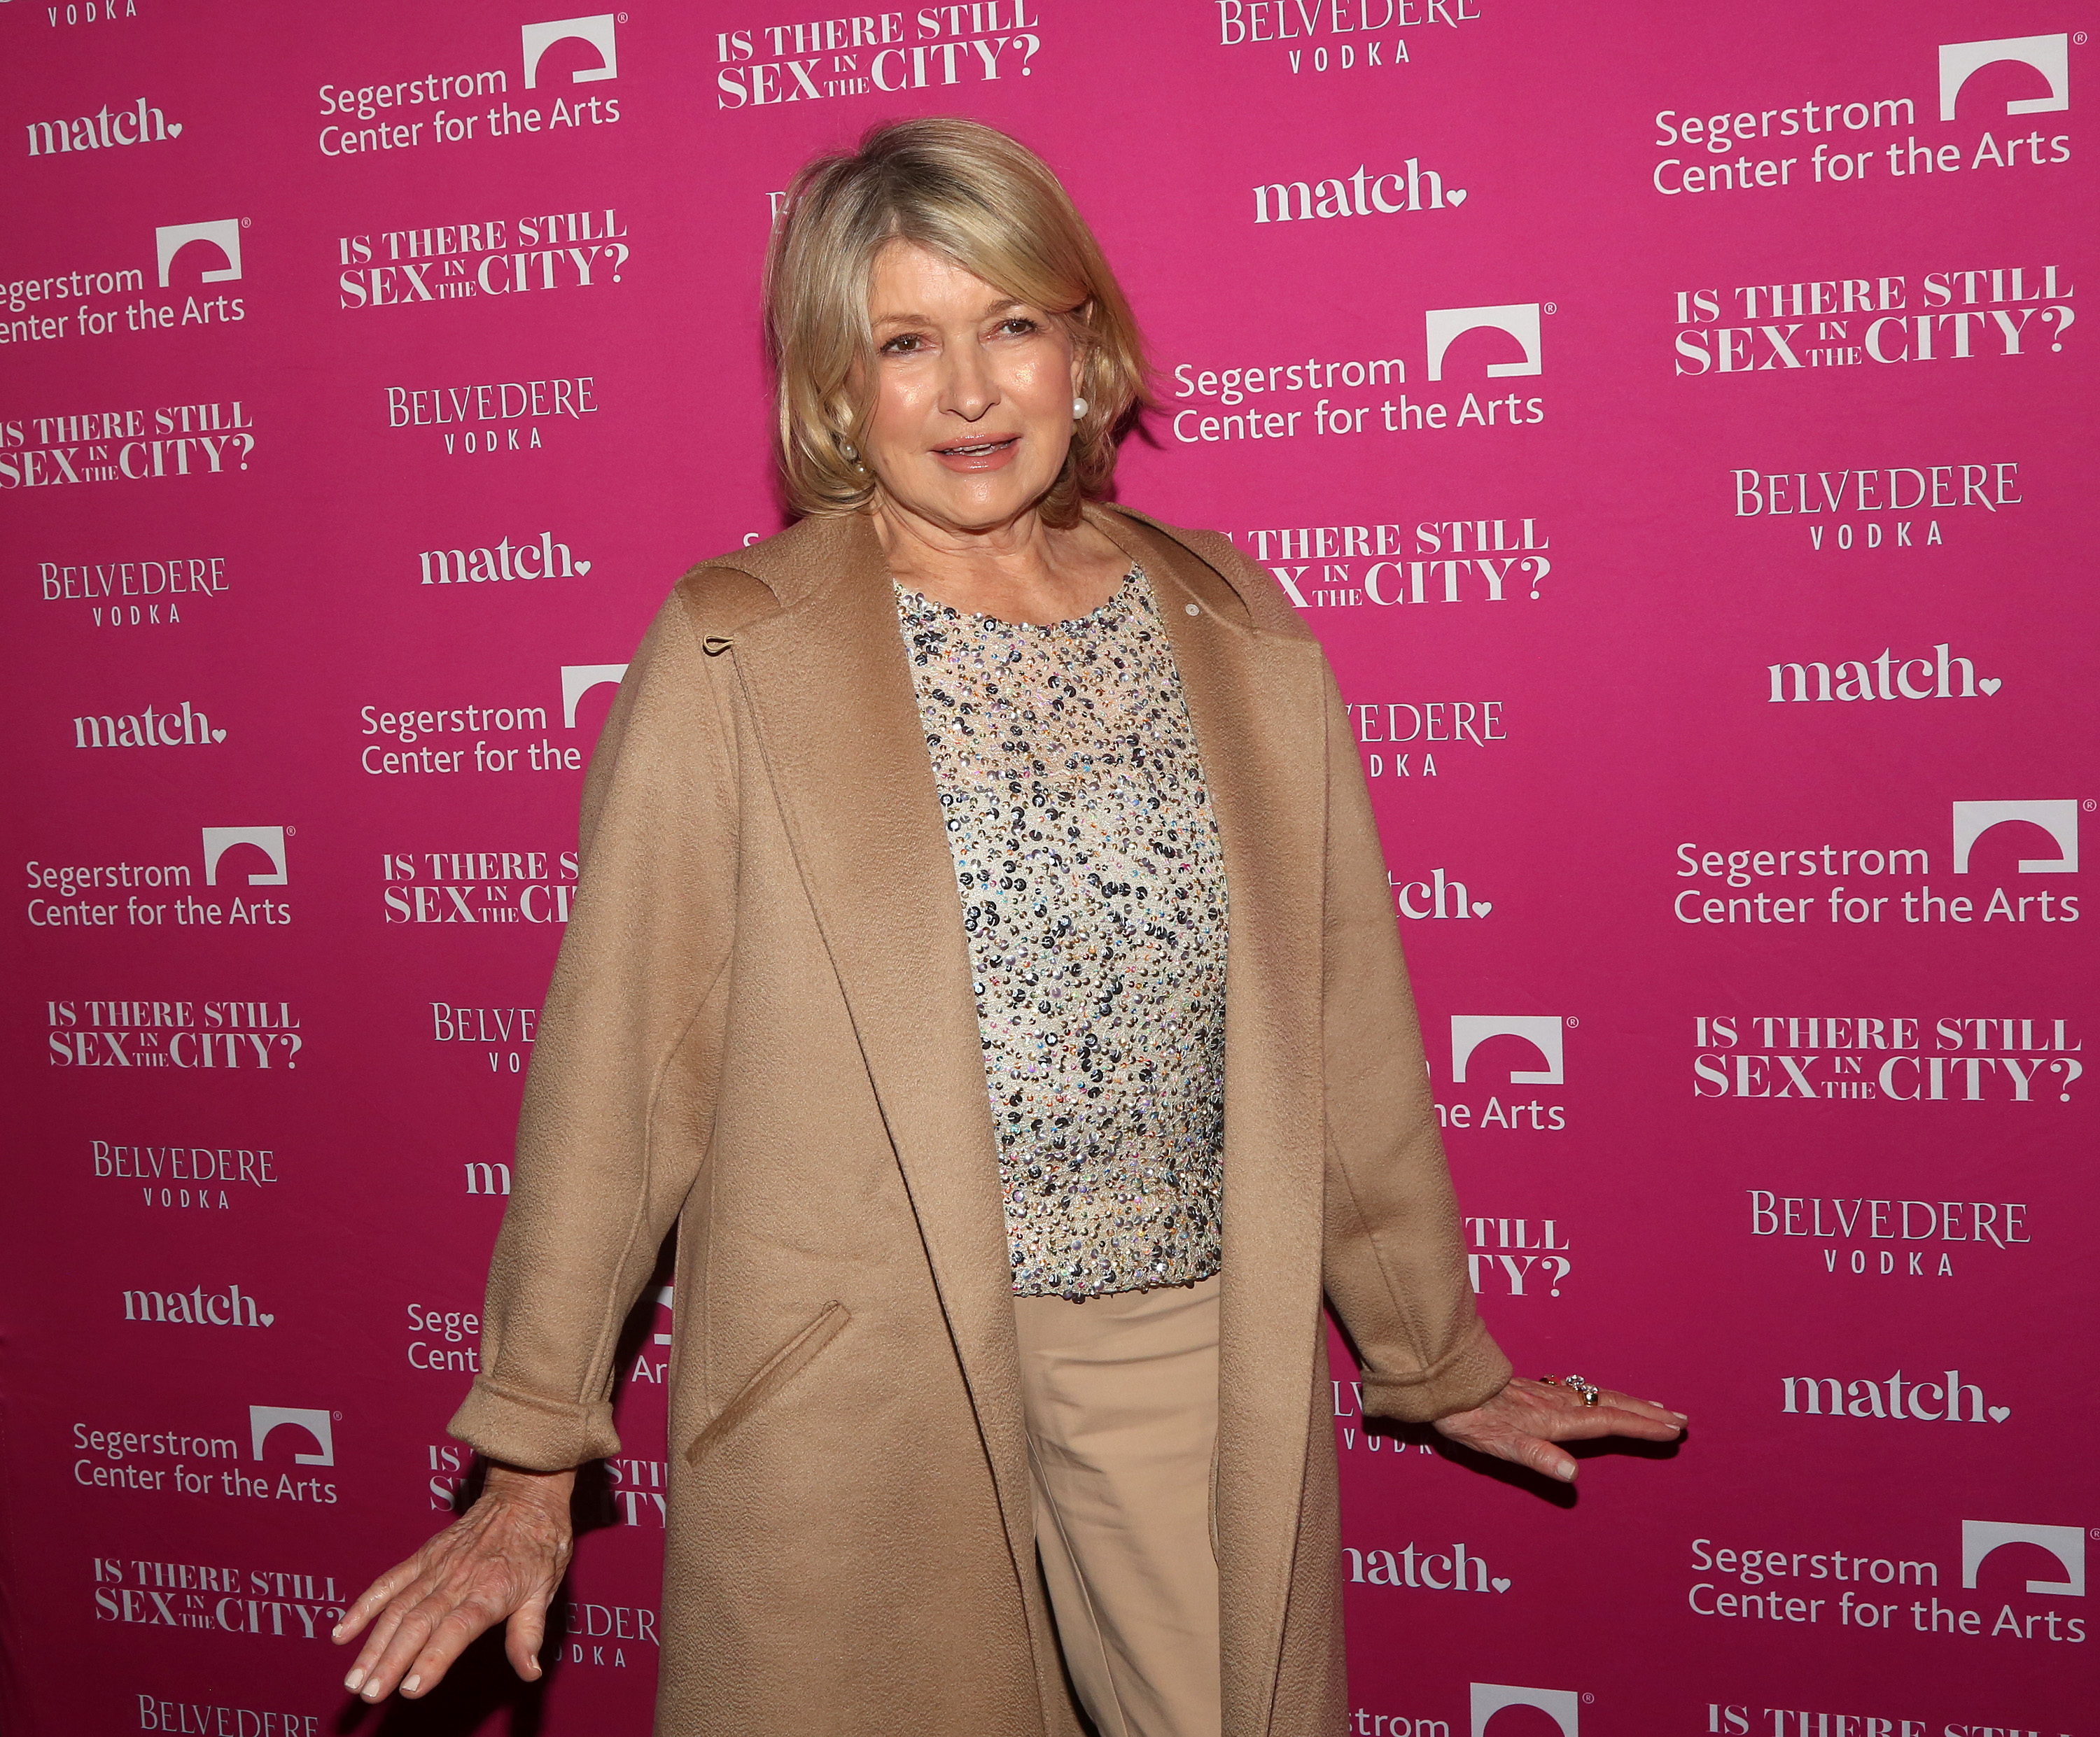 Martha Stewart Covers “Sports Illustrated”: 81-Year-Old Is Magazine’s Oldest Swimsuit Model